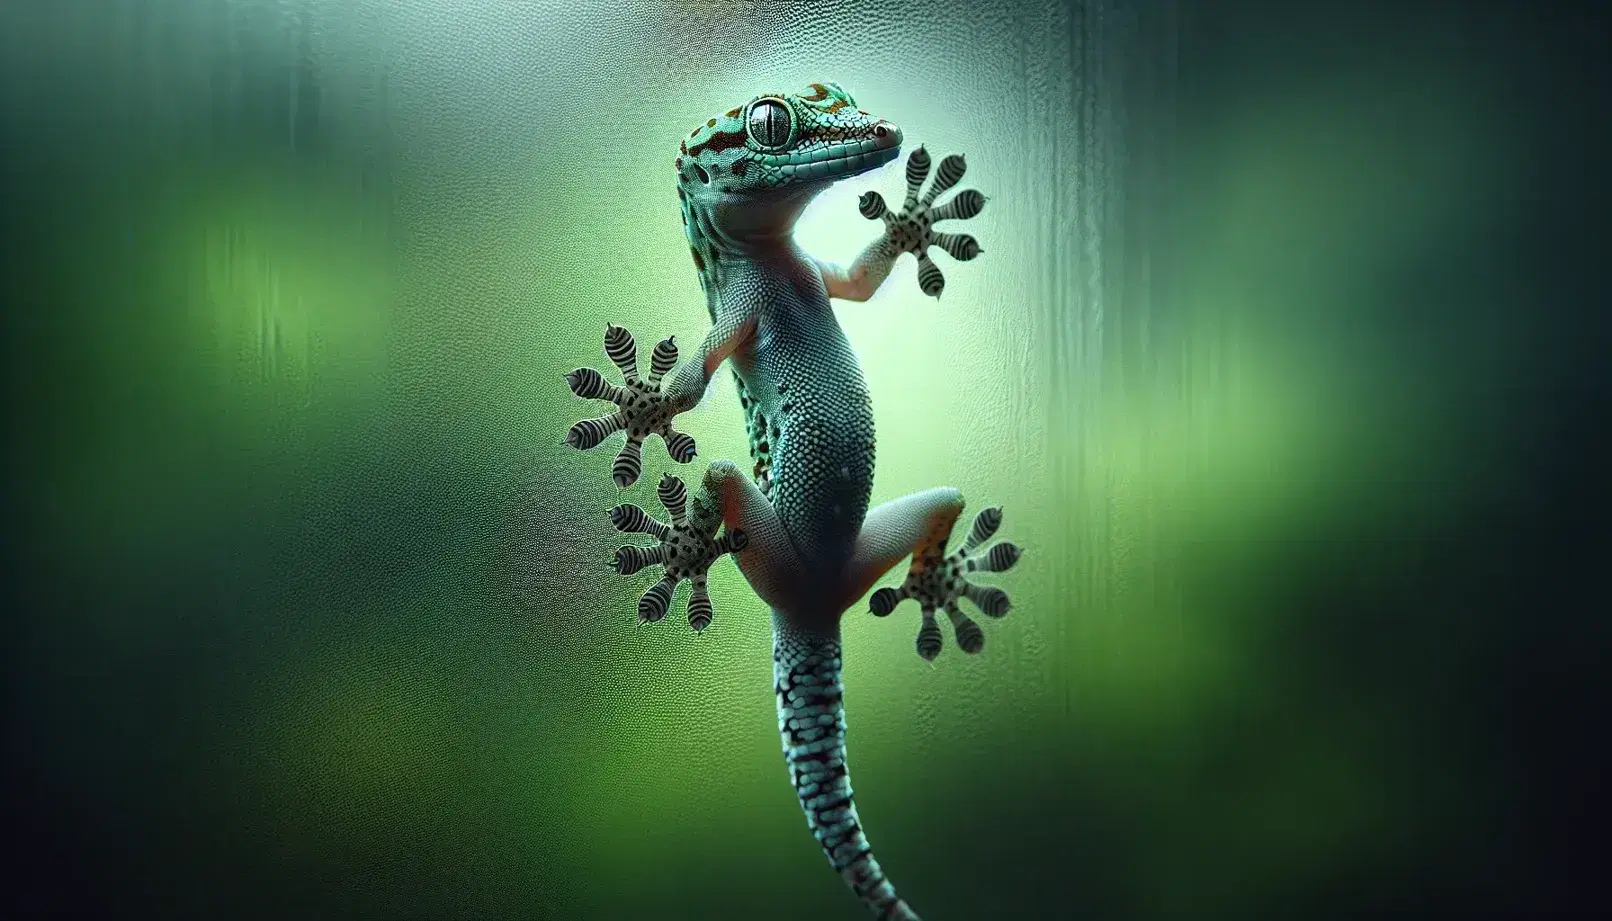 Gecko on vertical glass surface shows setae on feet, camouflage green and brown skin, natural blurred background, soft lighting.